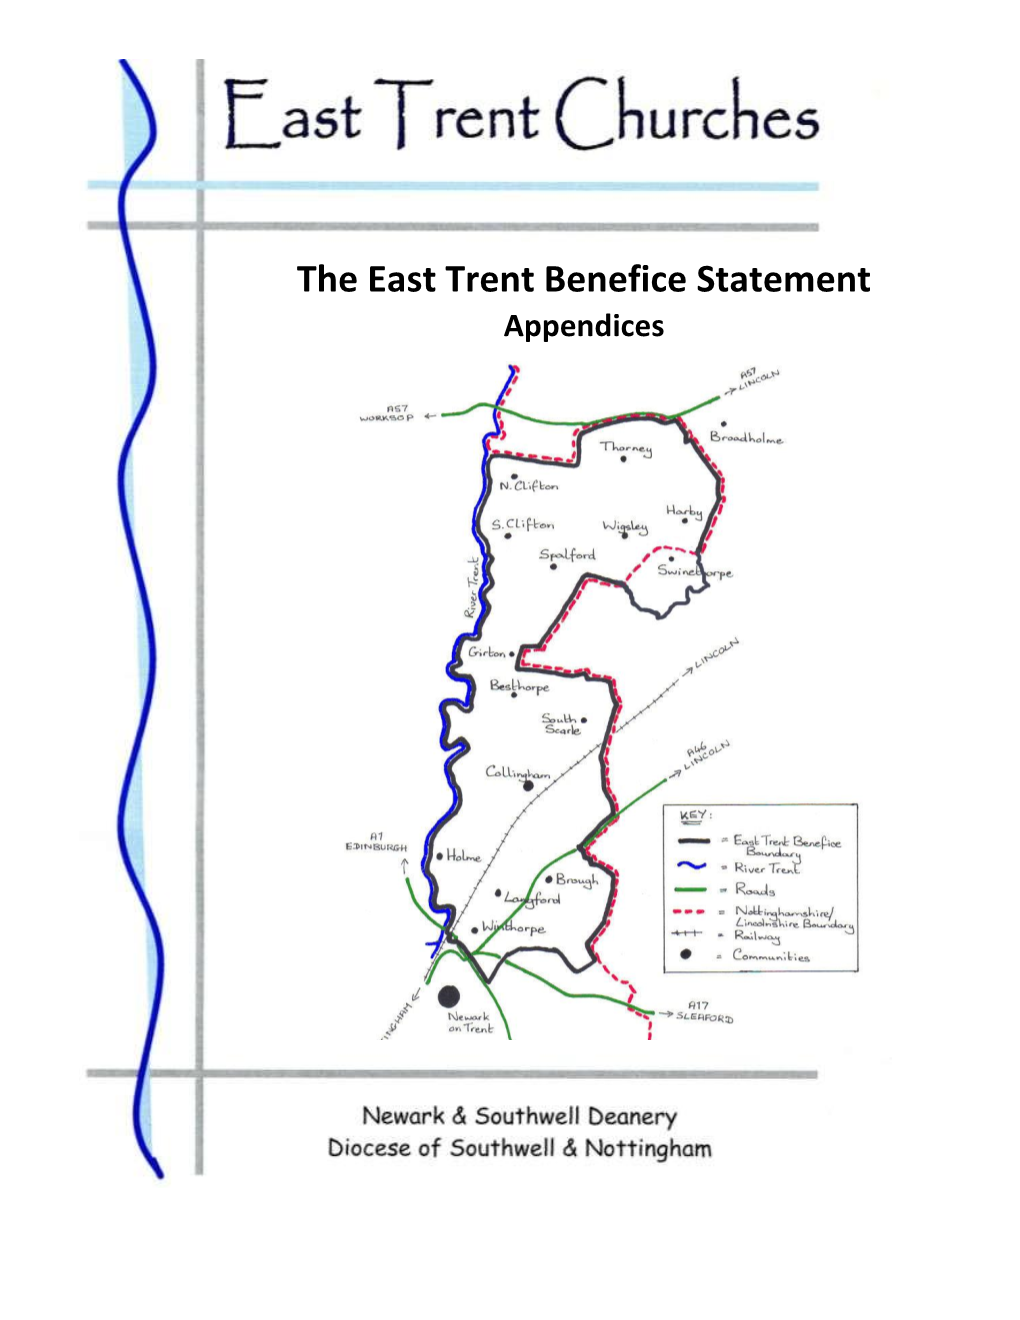 The East Trent Benefice Statement Appendices